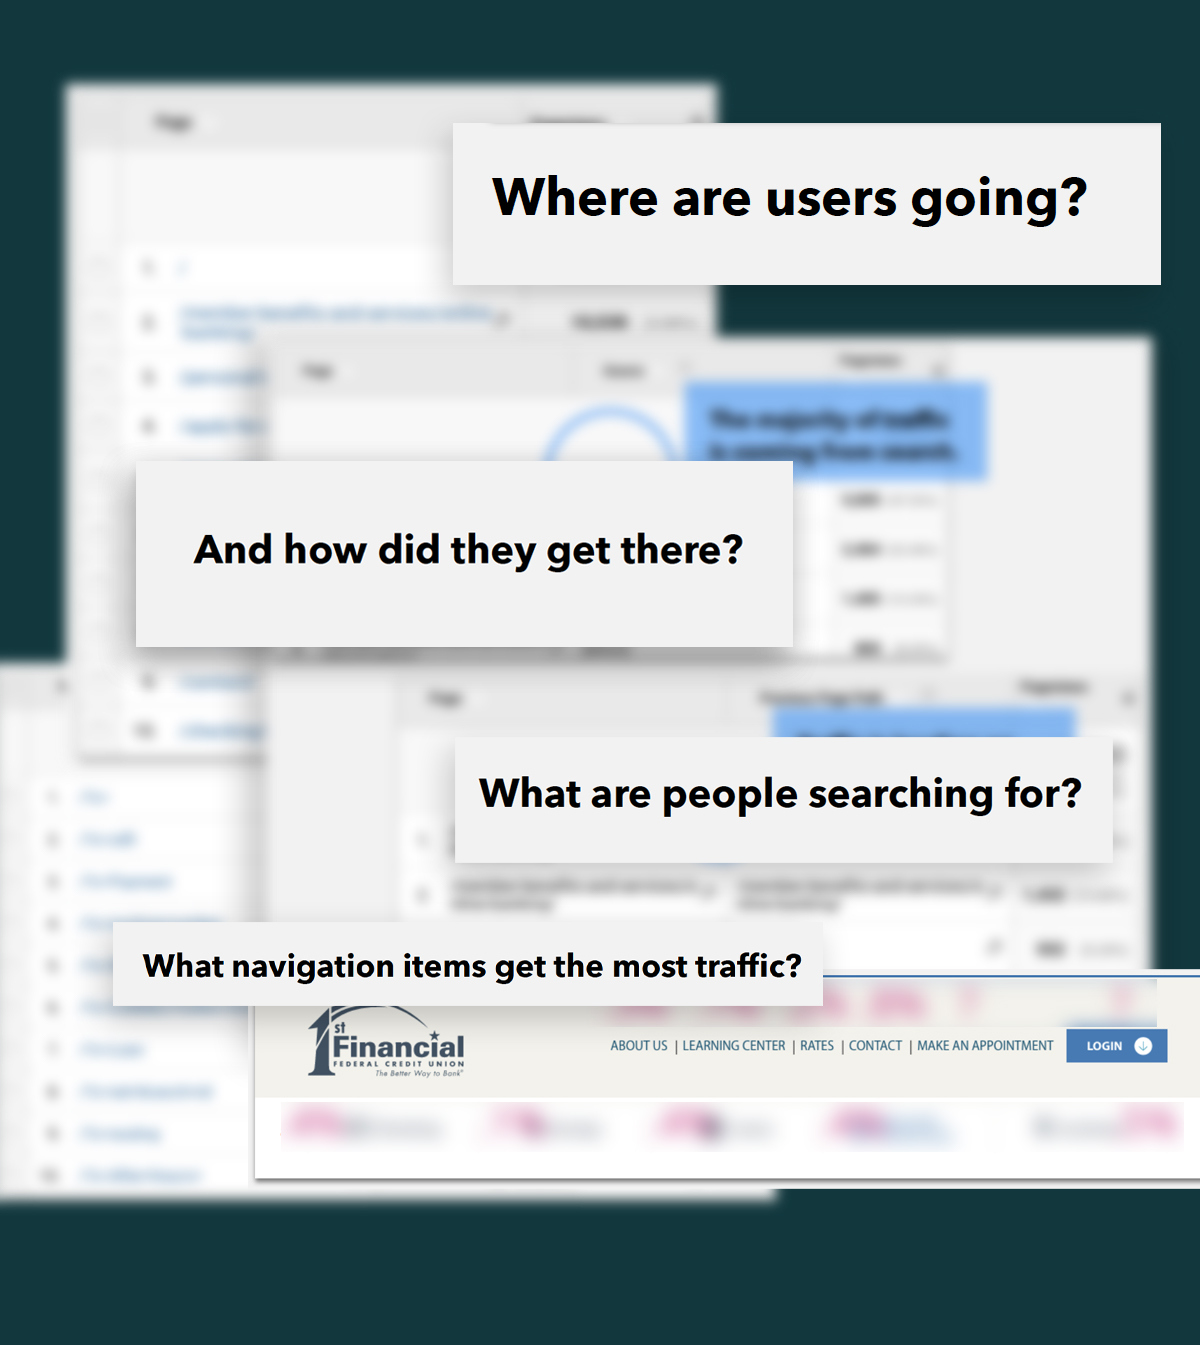 Questions and screenshots from our user experience and SEO research, including "Where are users going?" "And how did they get there?" and "What are people searching for?"